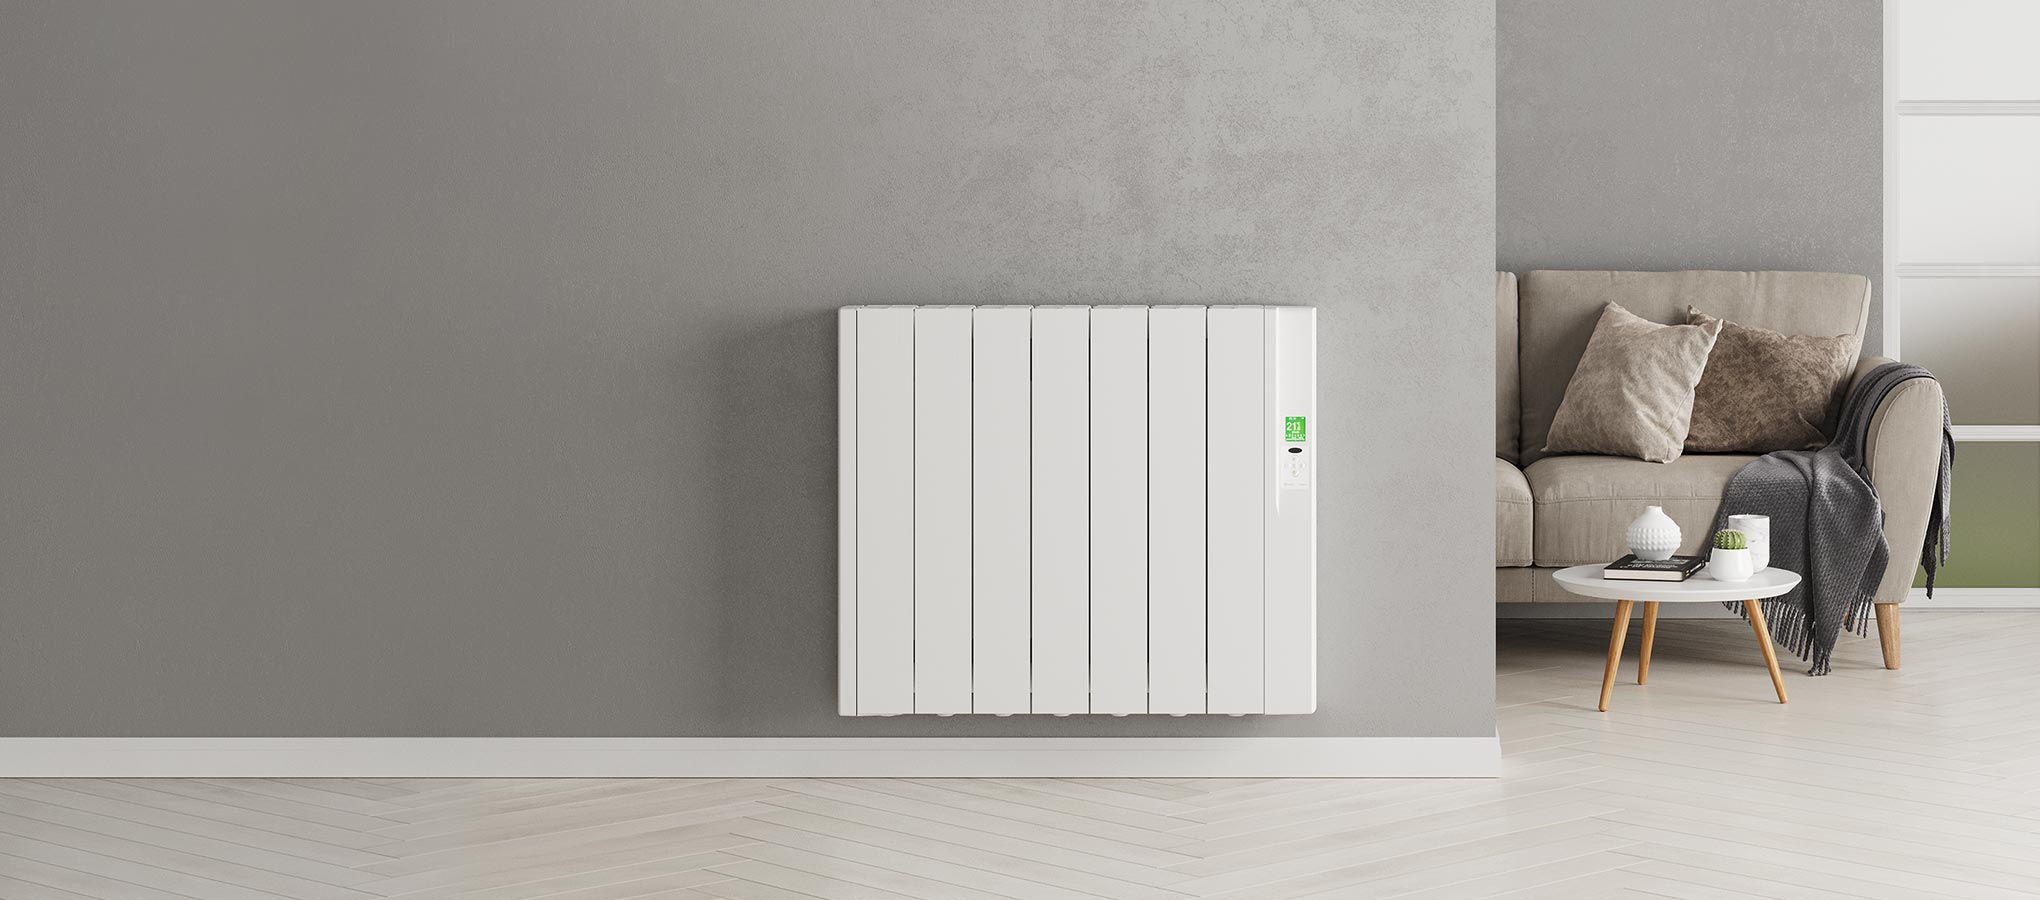 Rointe Sygma smart timer electric radiator in white wall mounted in living room